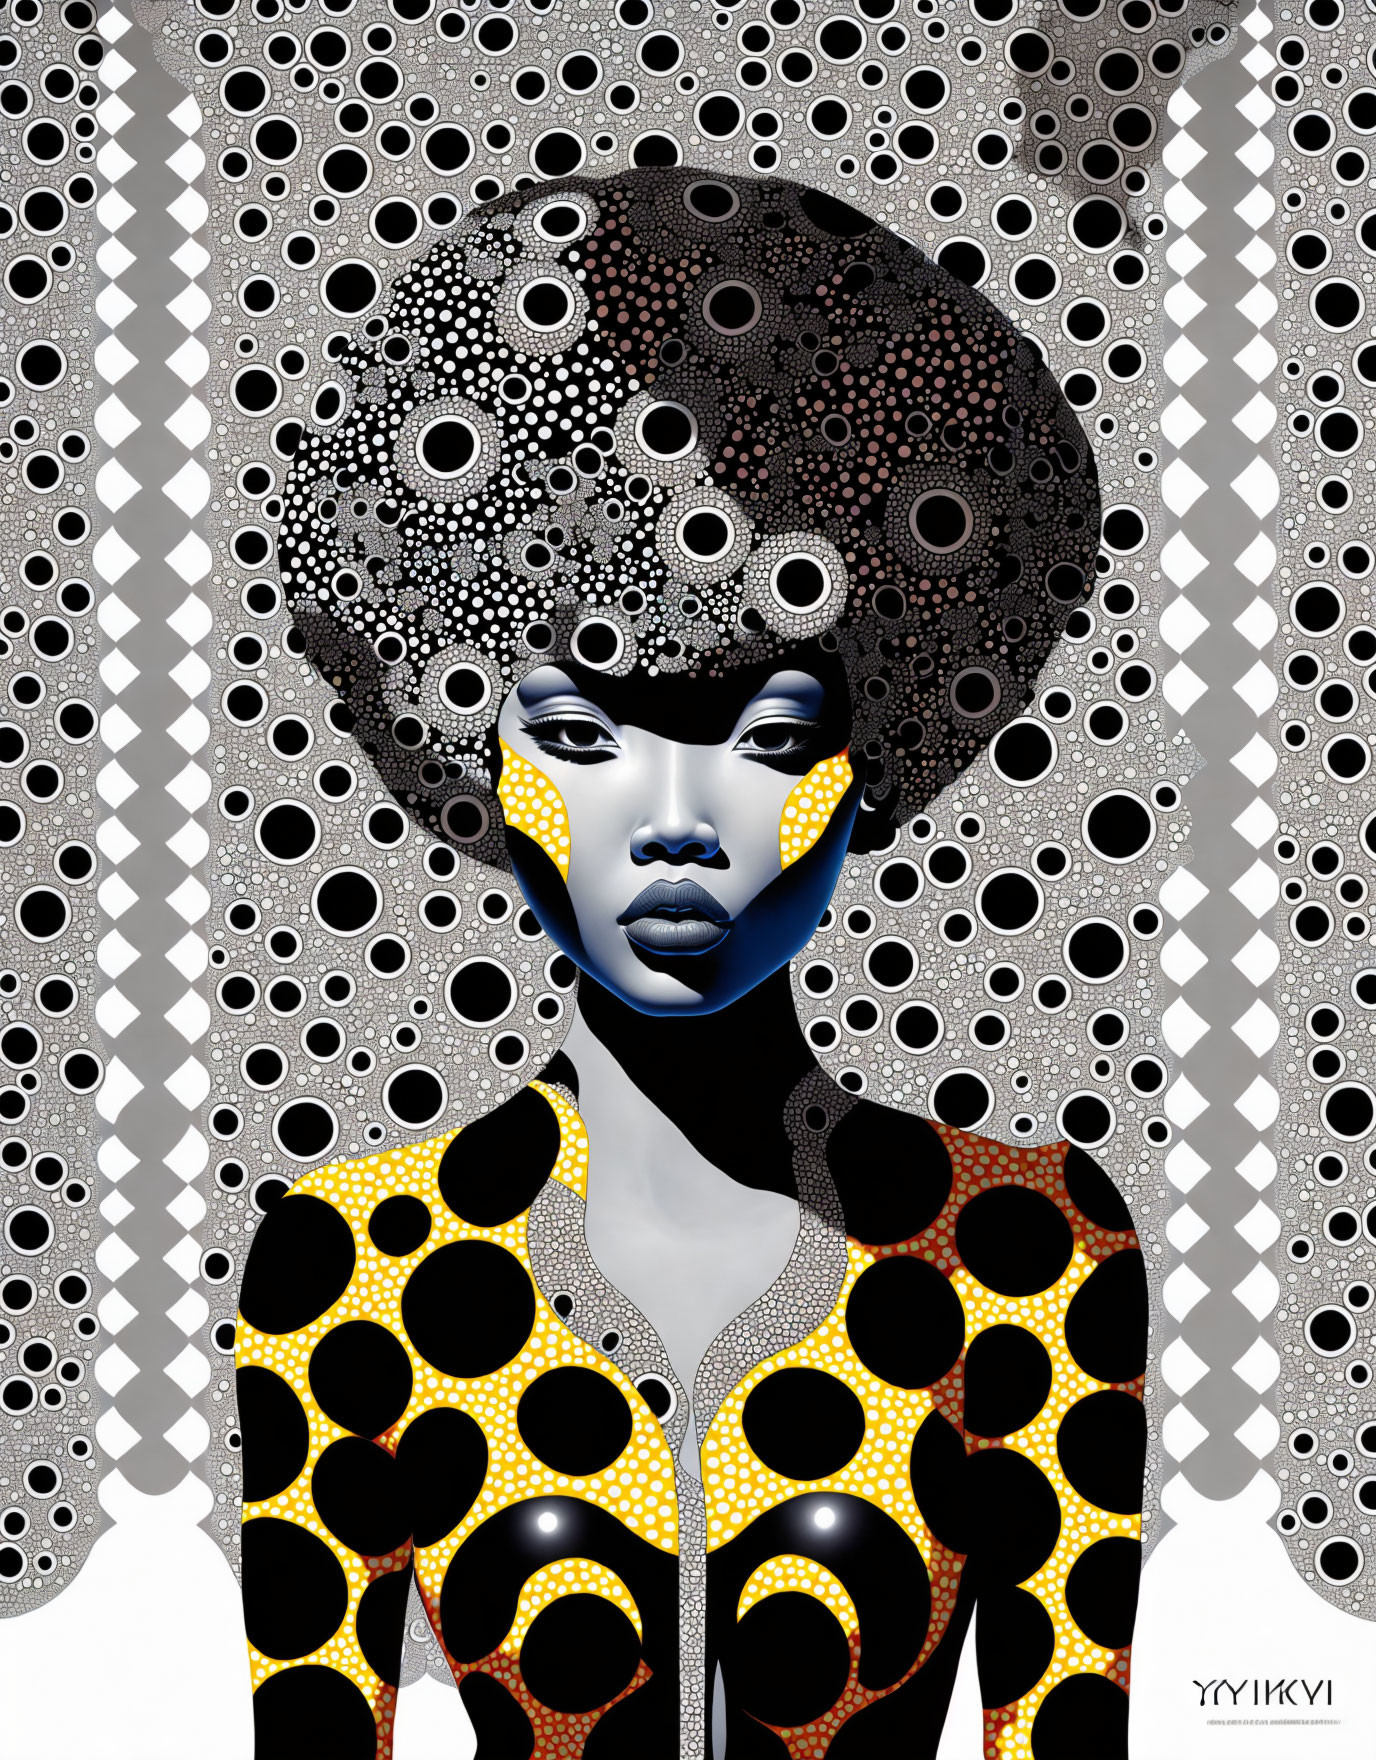 Afro (a 'Try it' test image). 